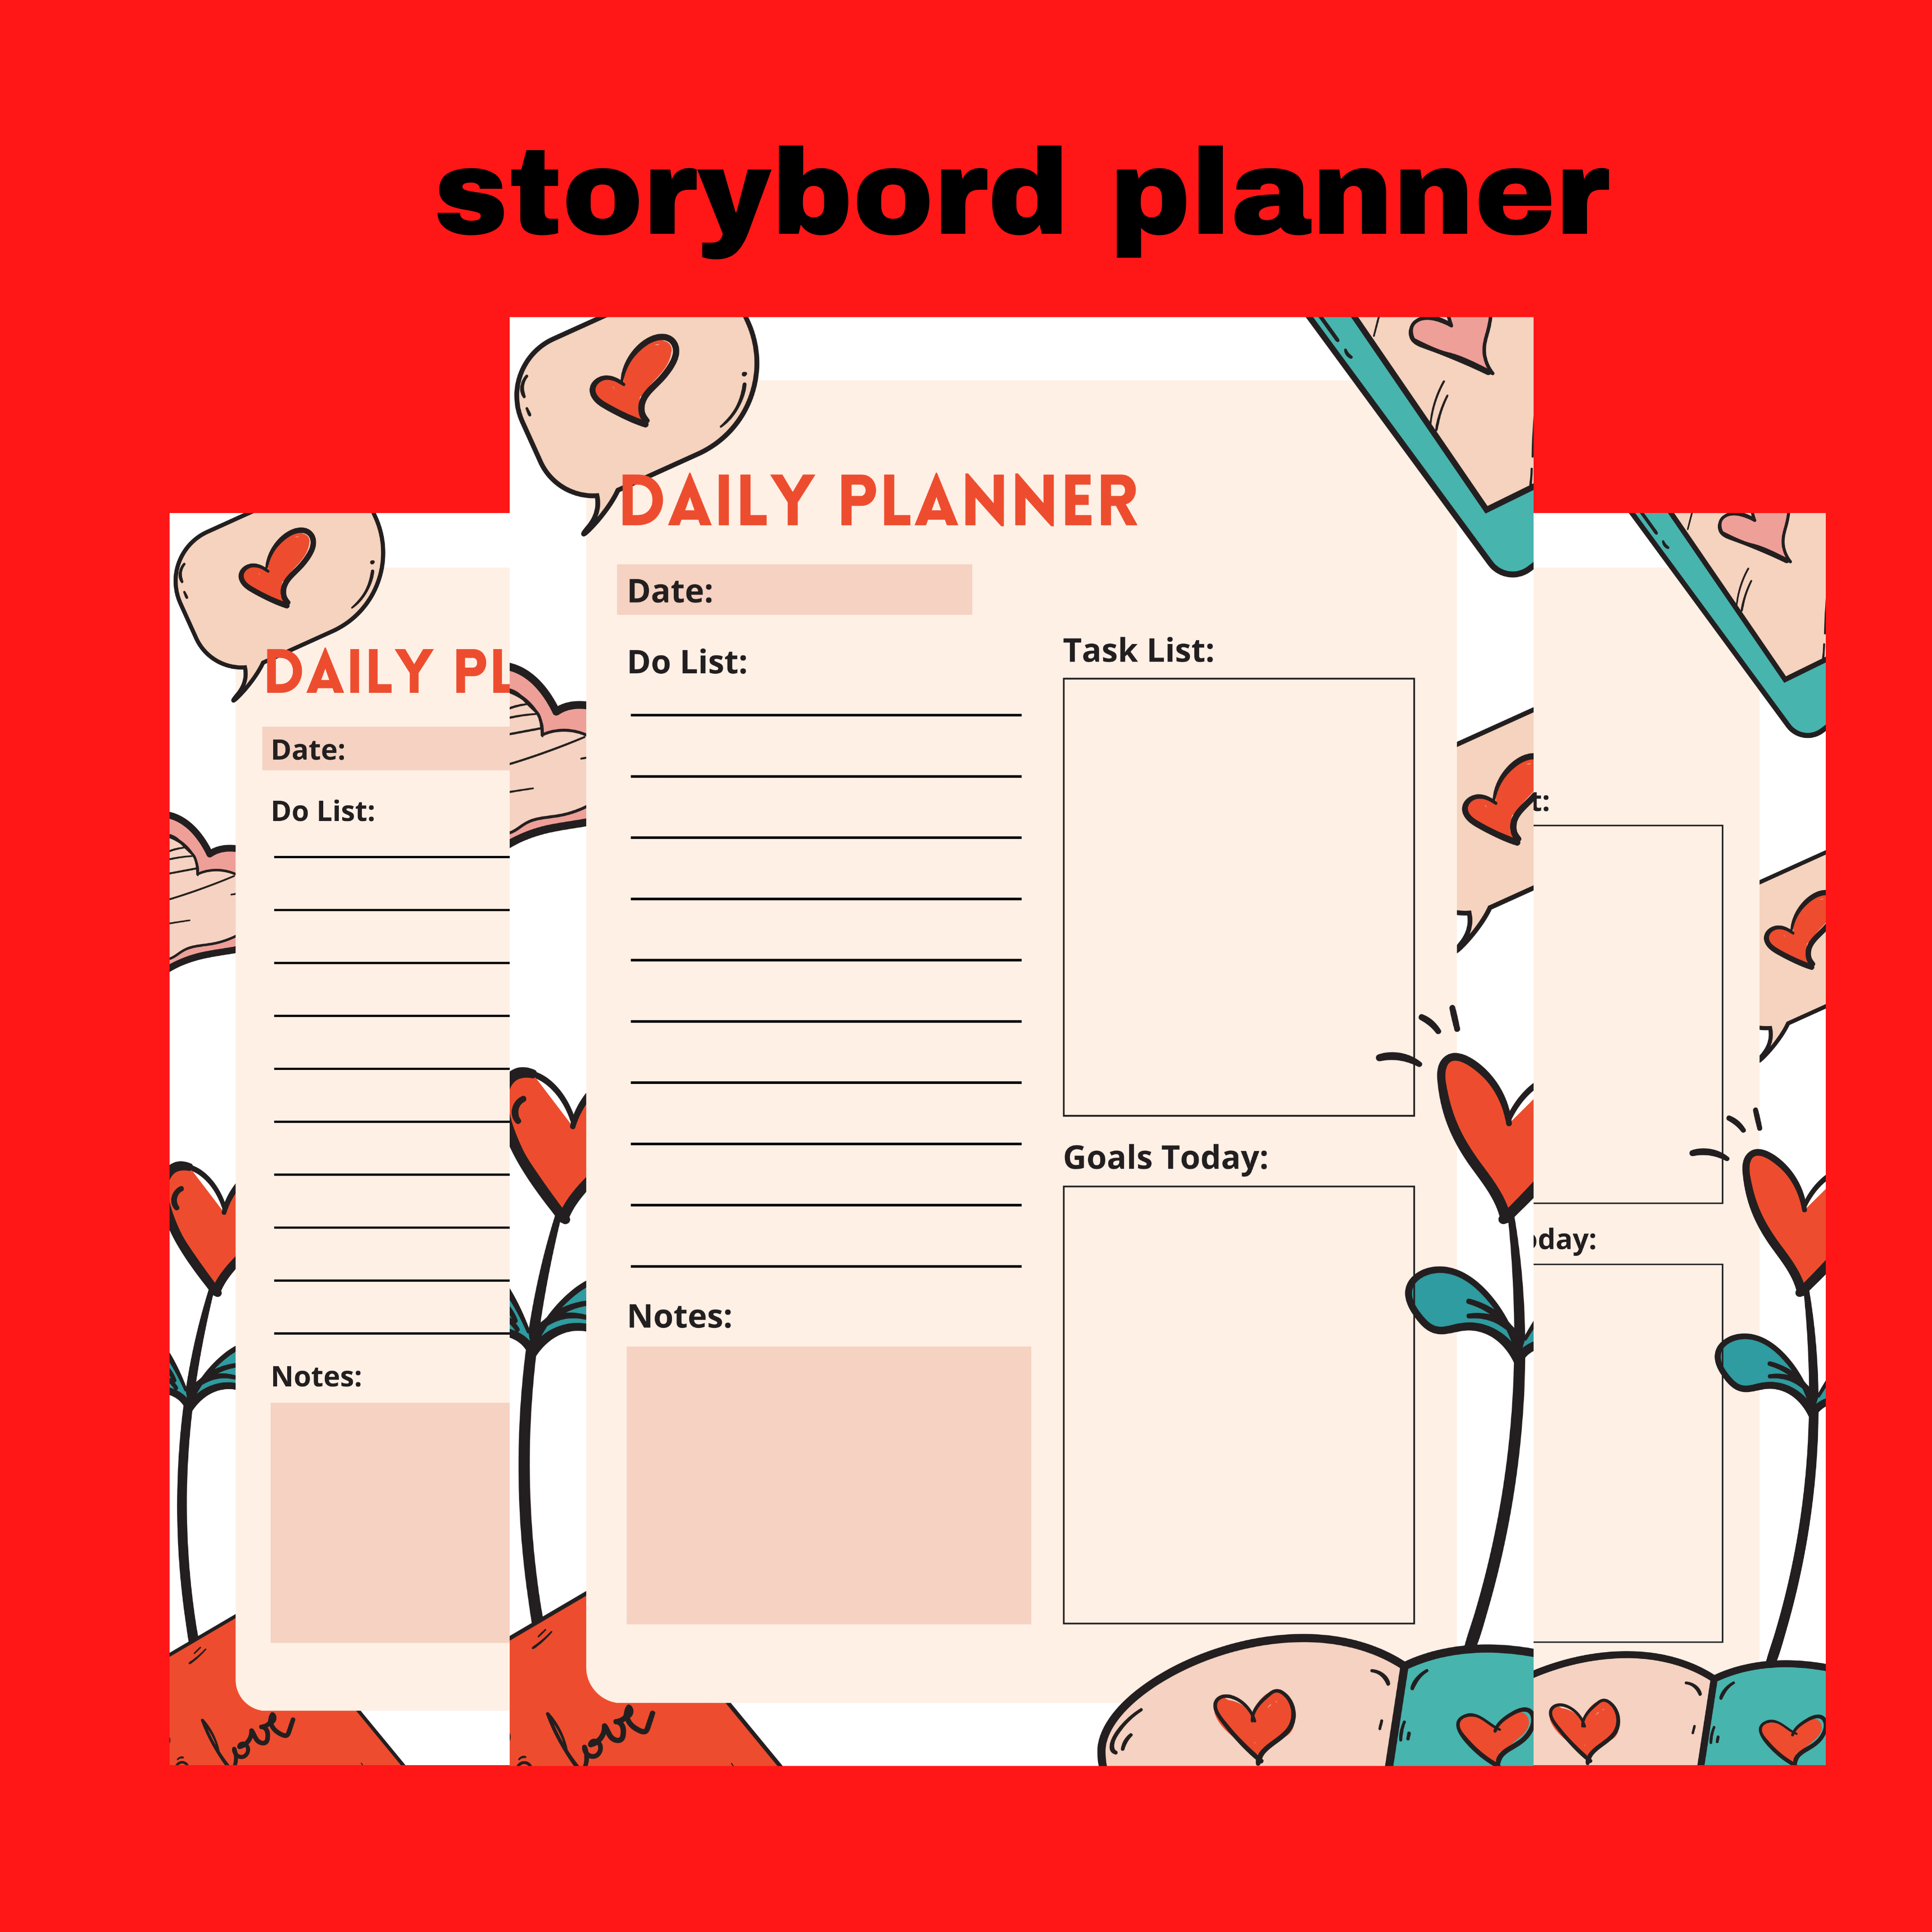 storybord planner template preview image.